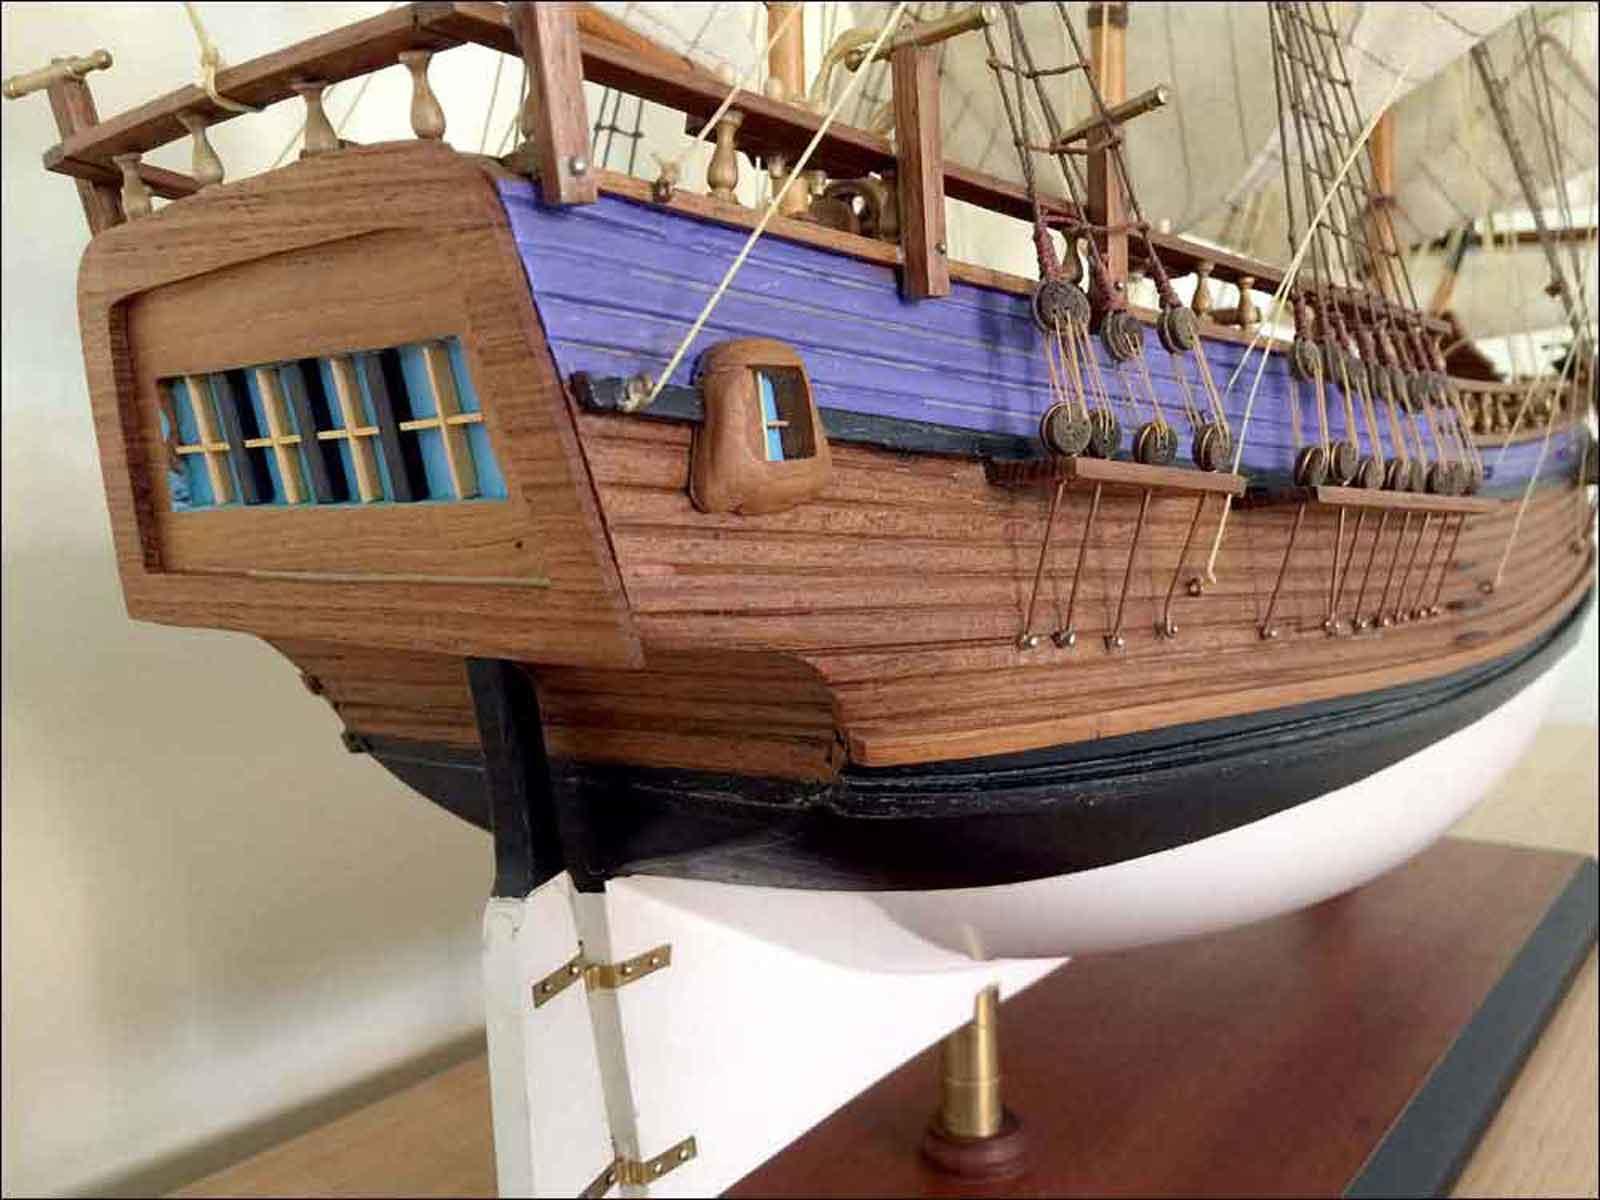 Cook's Endeavour period ship model